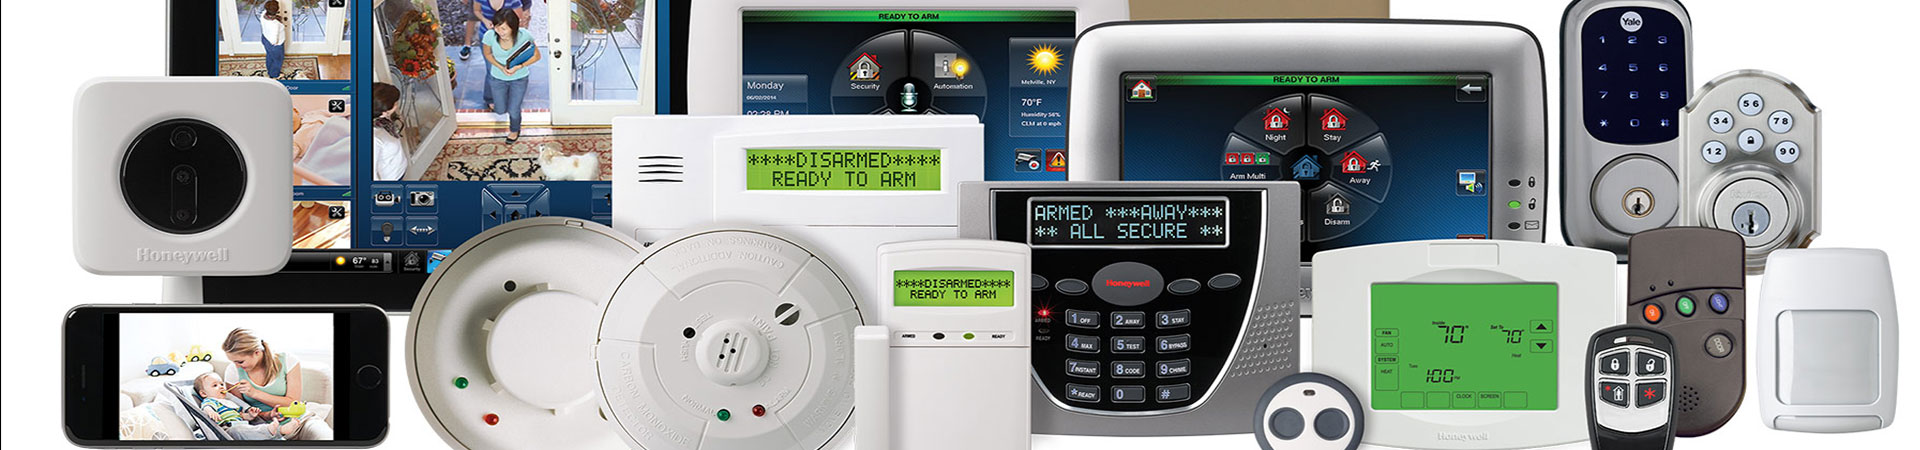 Honeywell Vista Family of Products